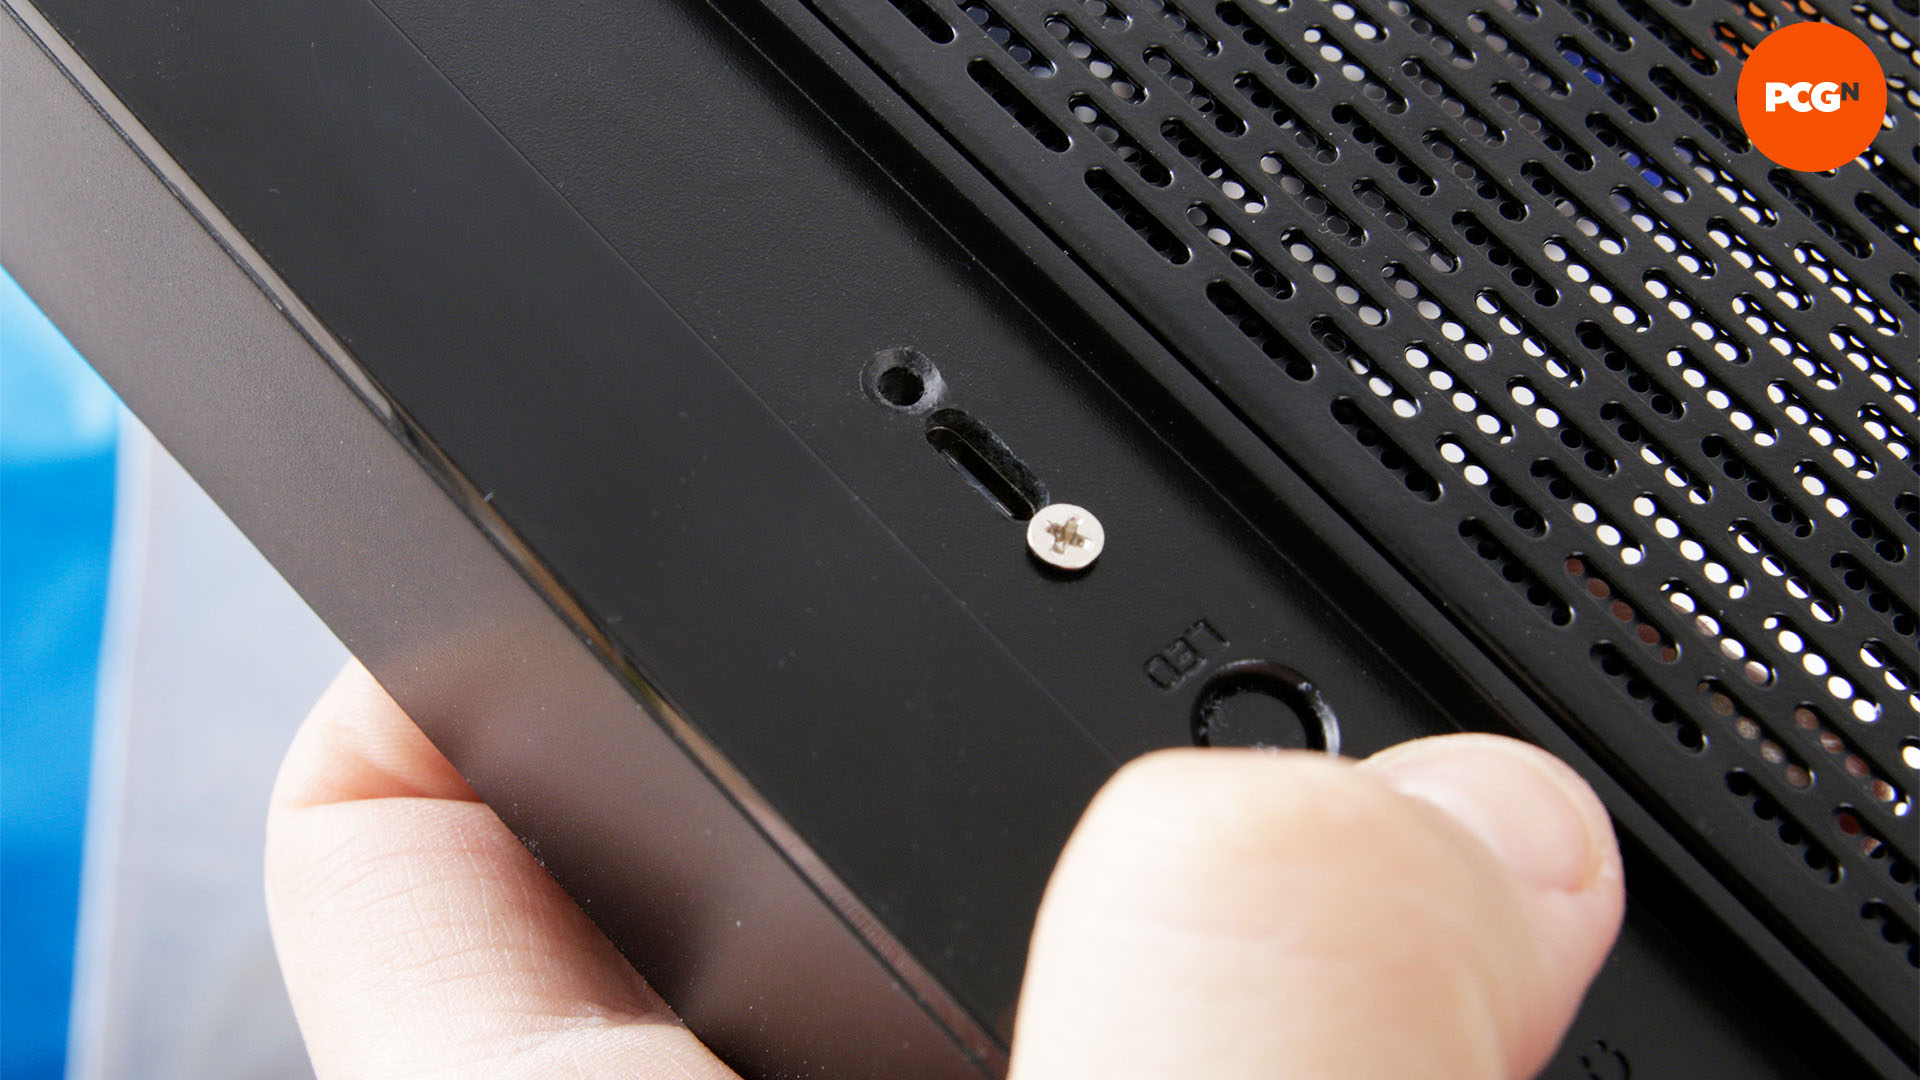 How to add USB-C to your PC case: Drill screw recesses